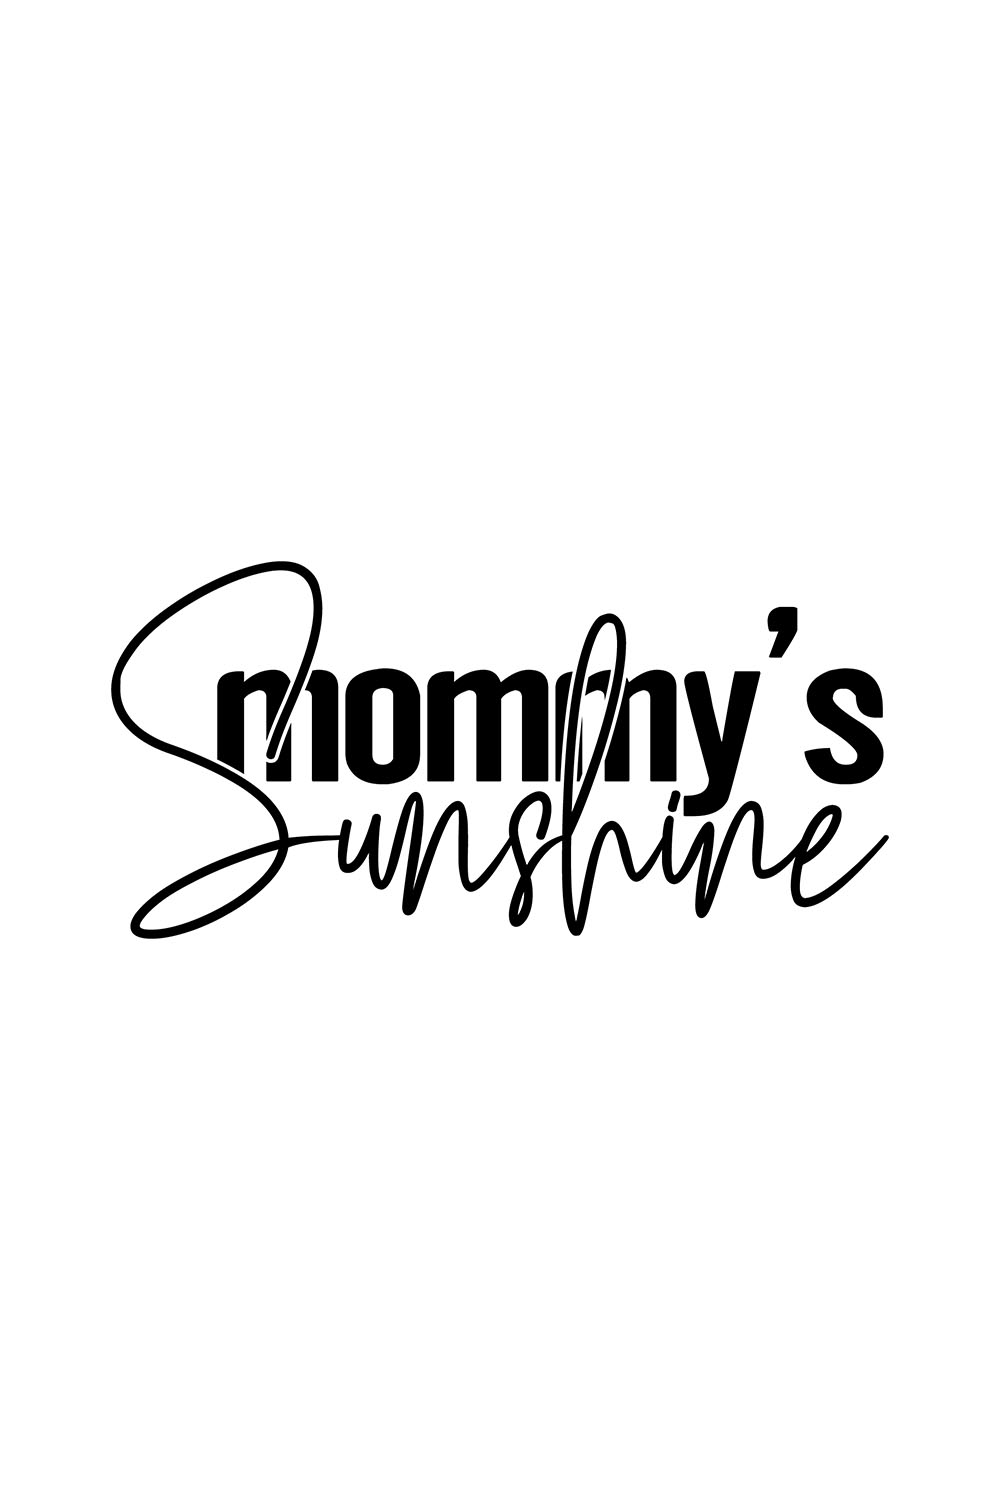 Image with exquisite black lettering mommys sunshine.